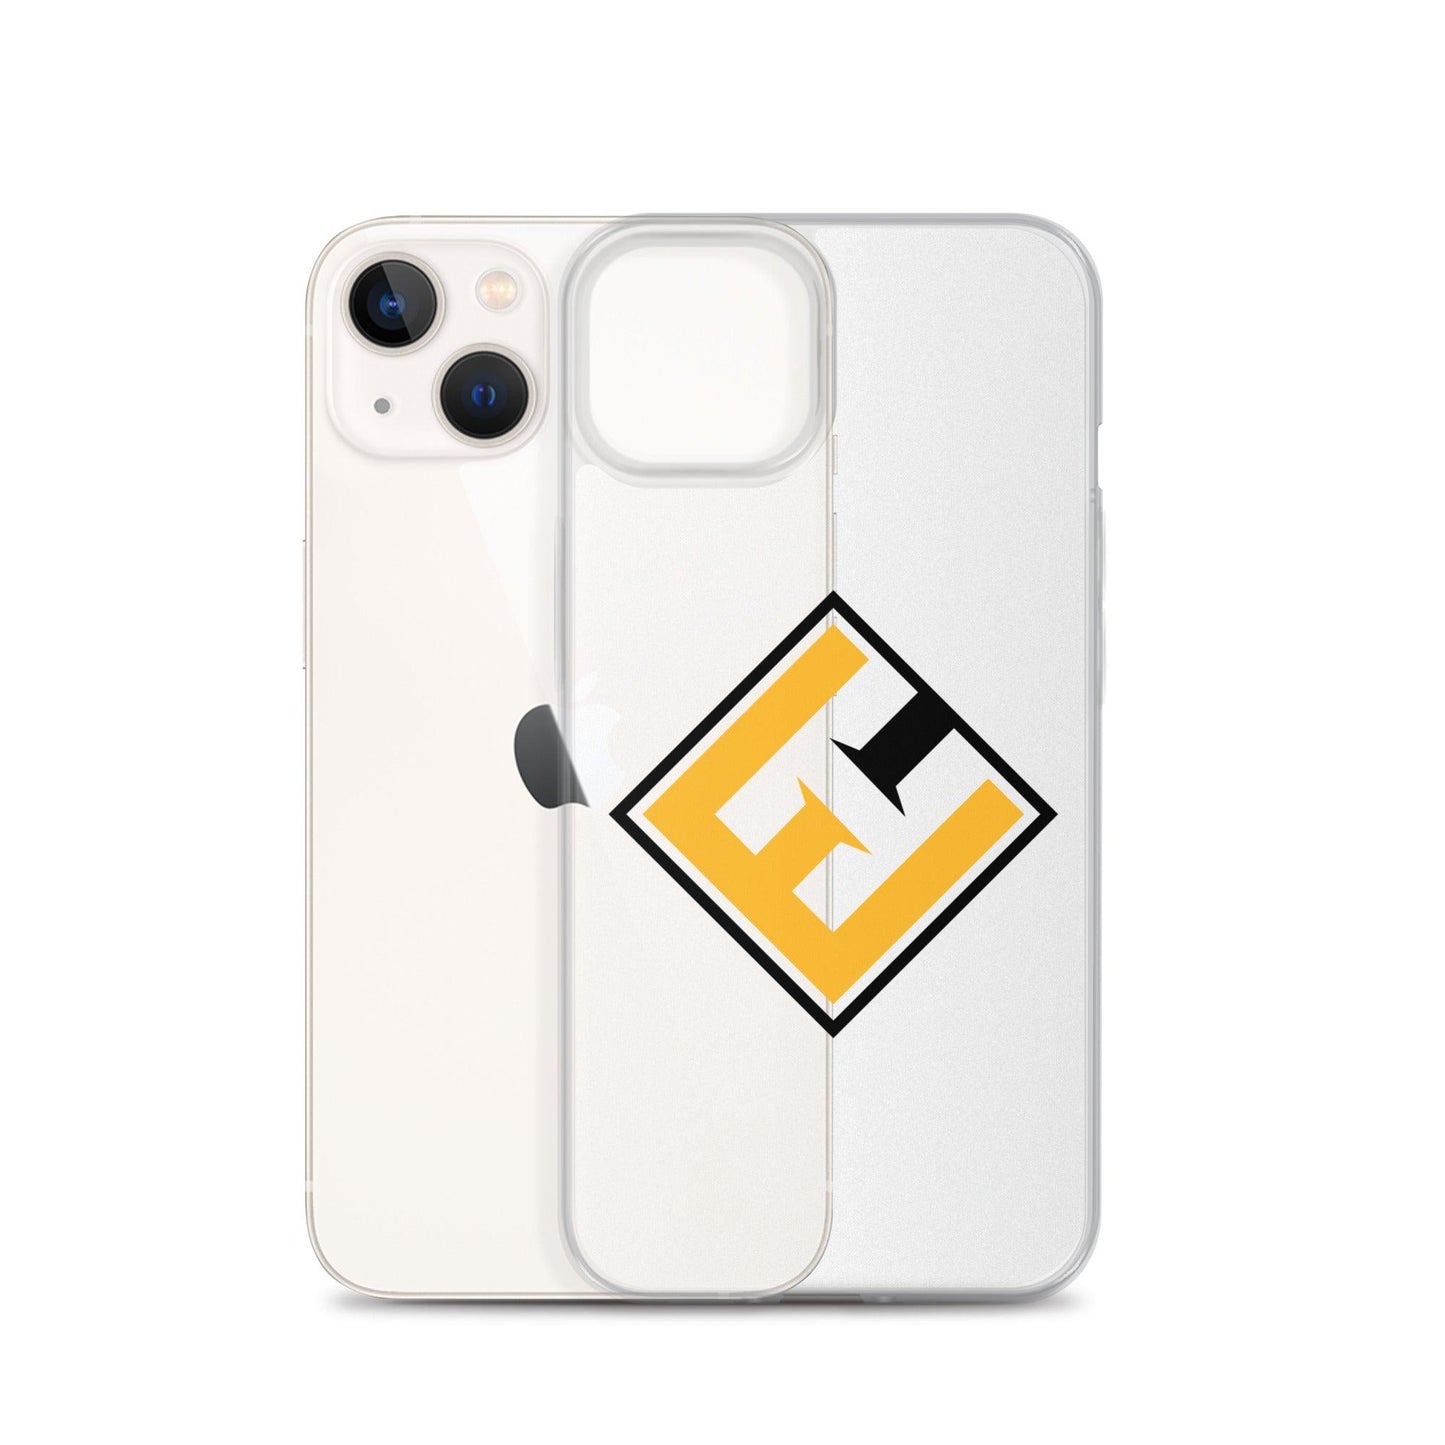 Eric Hanhold “EH” iPhone Case - Fan Arch